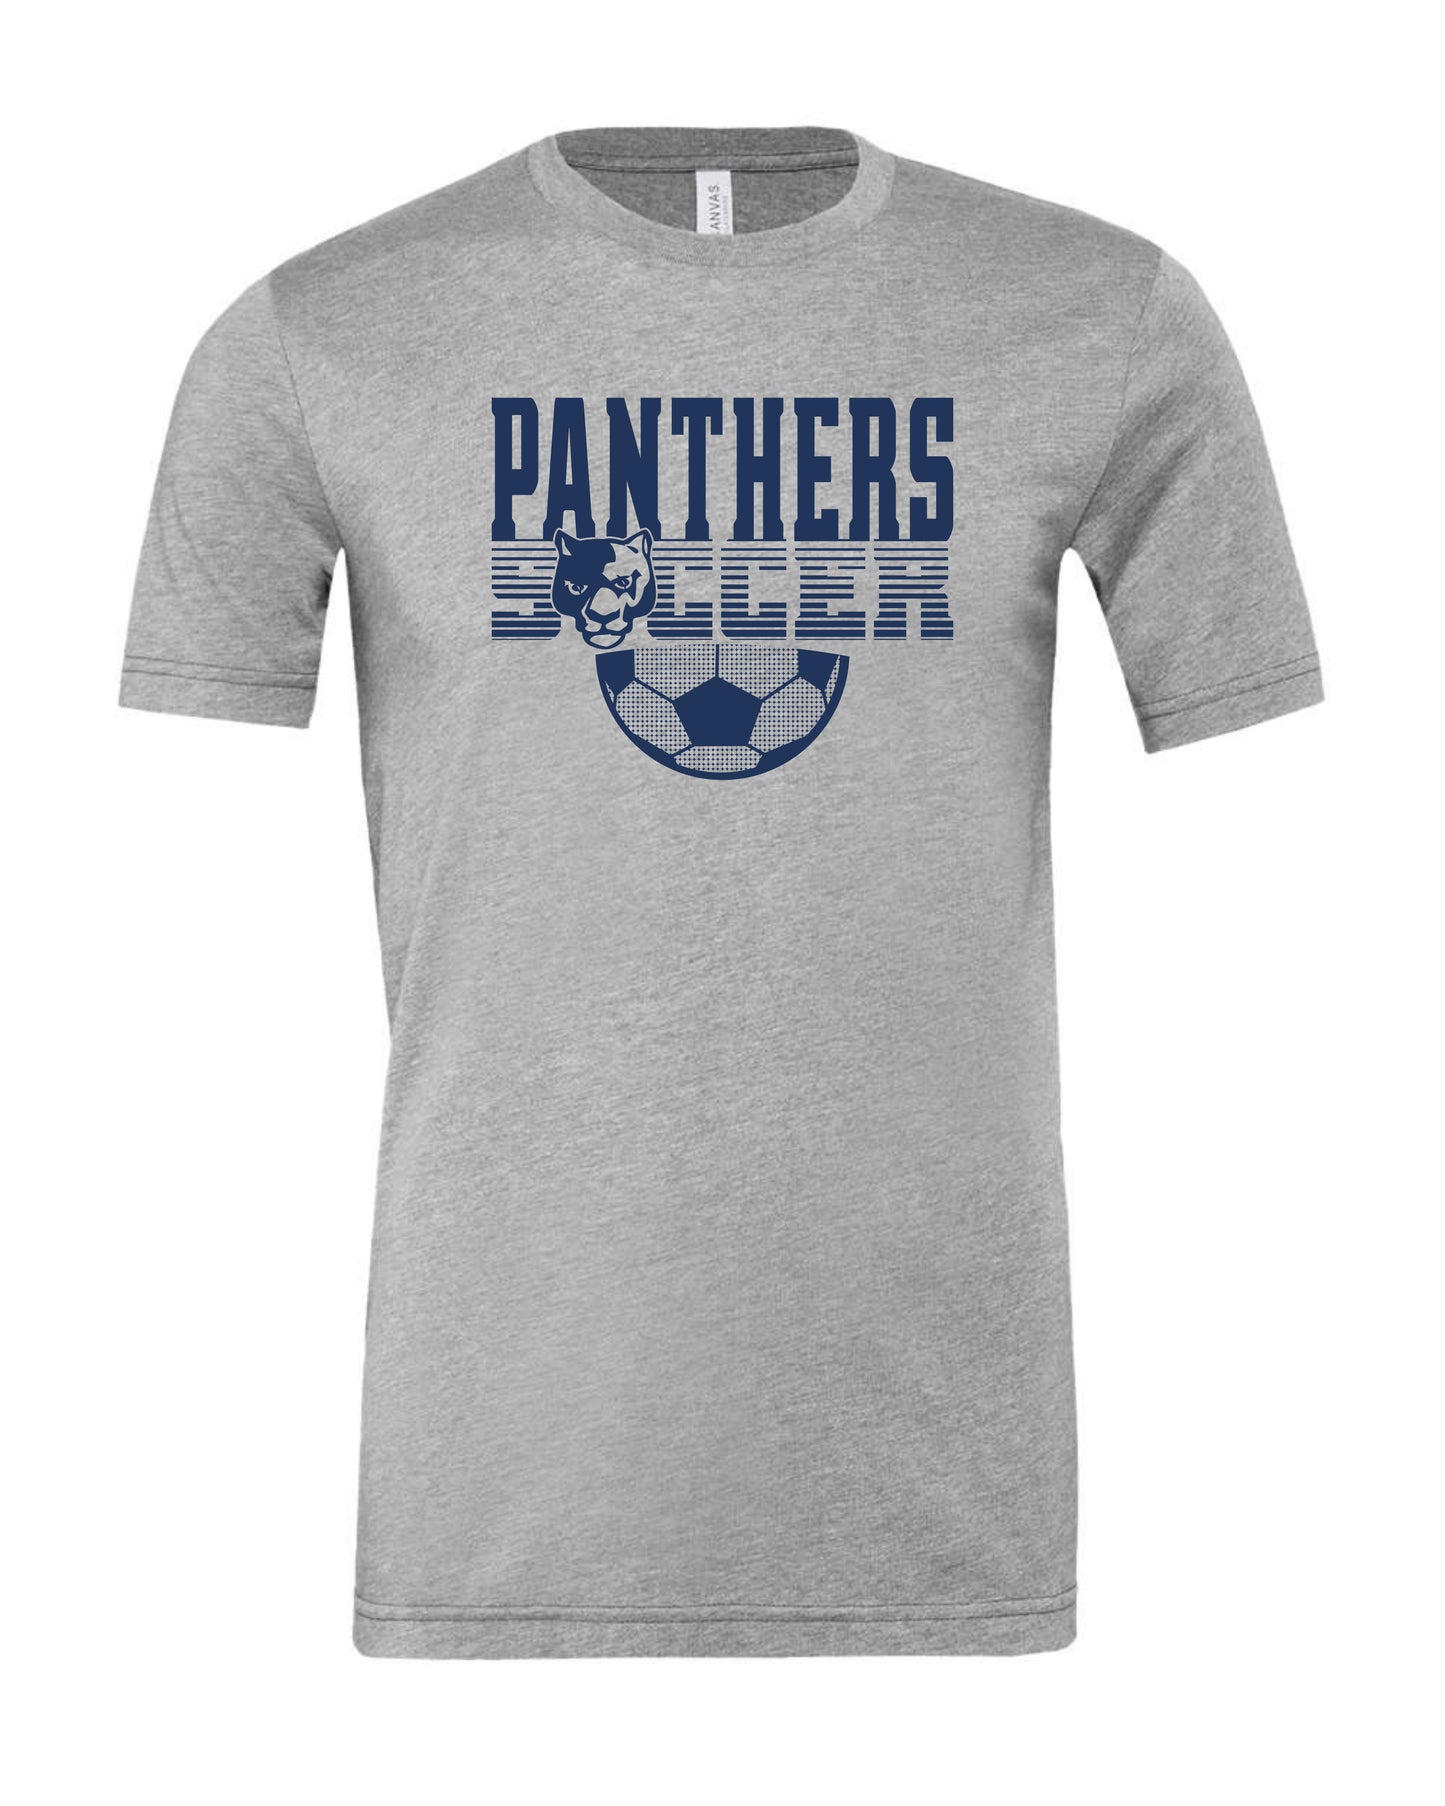 Panthers Soccer Faded - Youth Tee